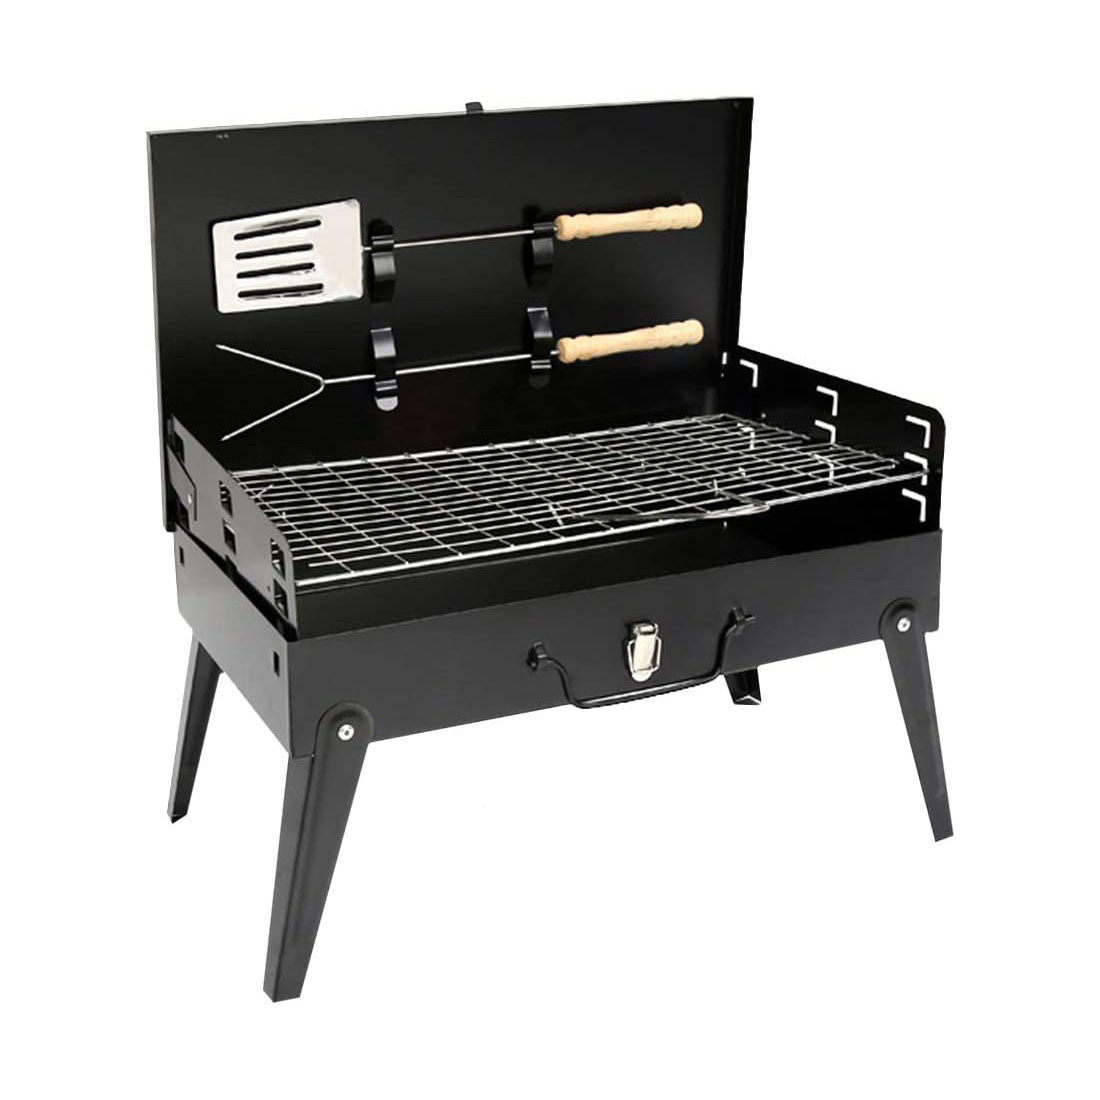 Portable Charcoal BBQ Grill for Camping, Travel